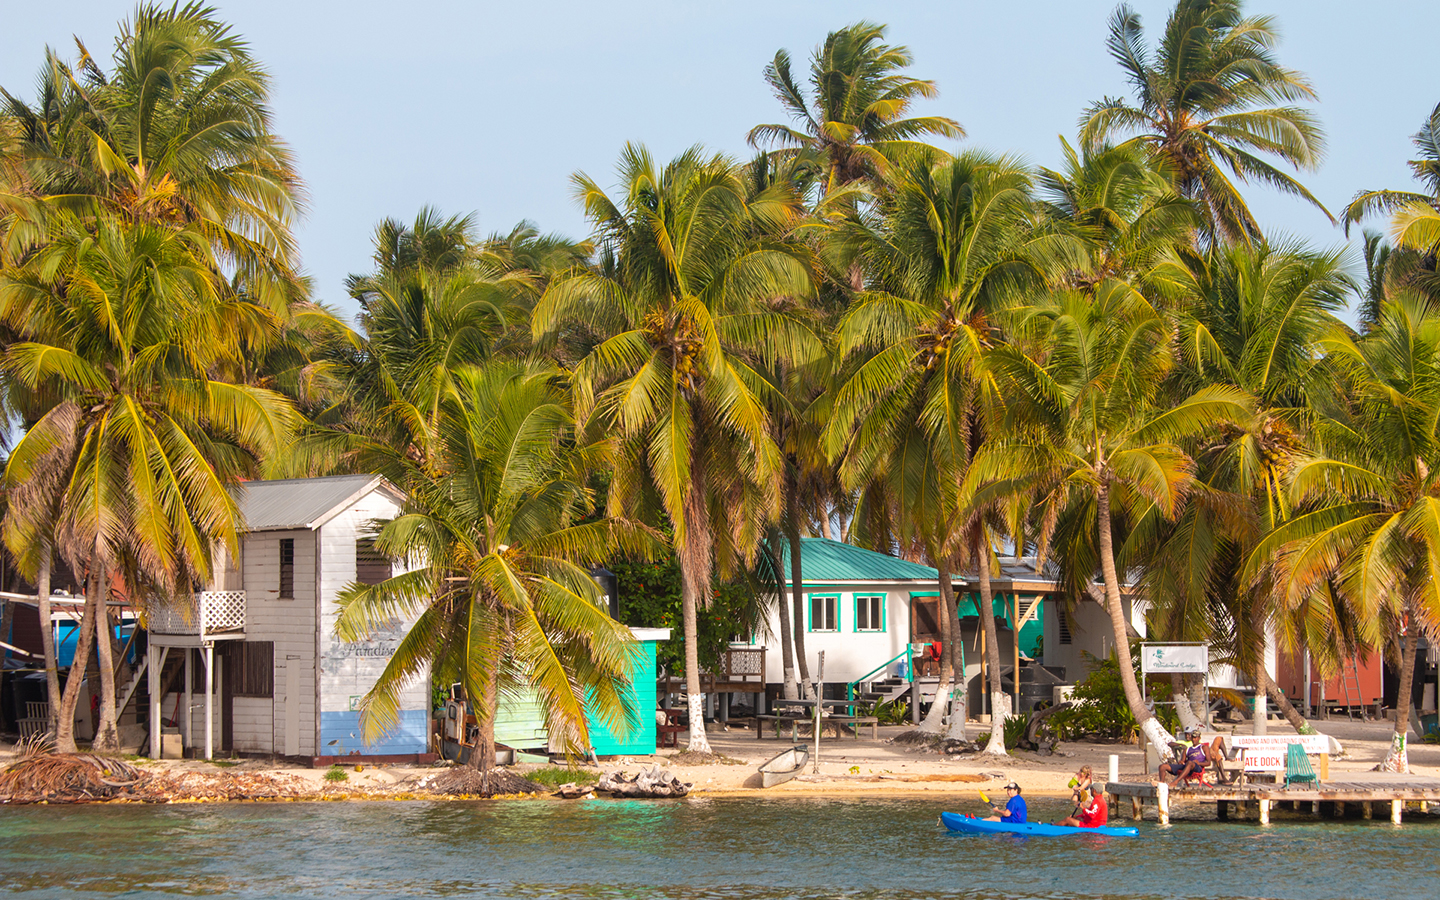 Palm trees and bright colored houses line the shoreline of a sandy island in Belize, people in a double kayak paddle by.